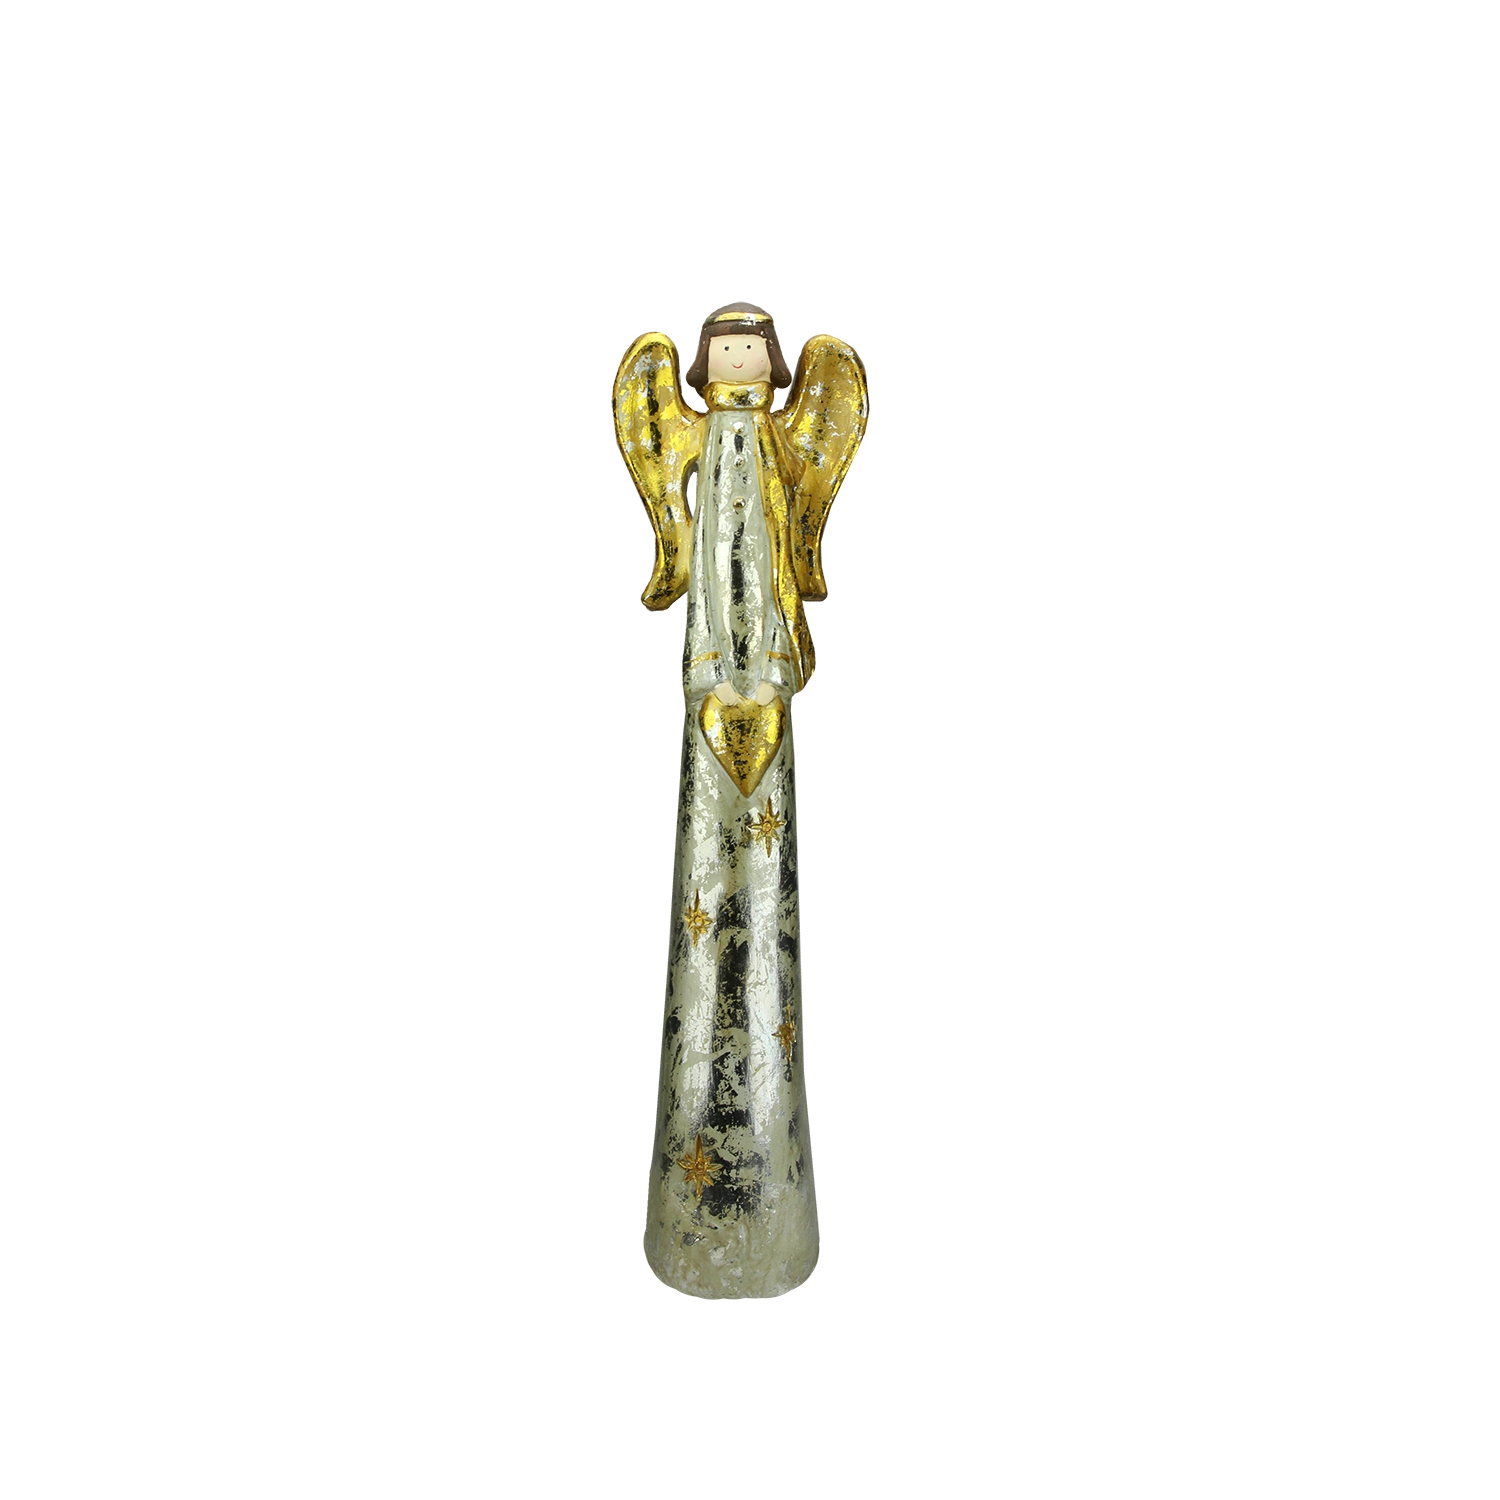 23.5" Silver and Gold Distressed Finish Angel with Heart Christmas Tabletop Figurine